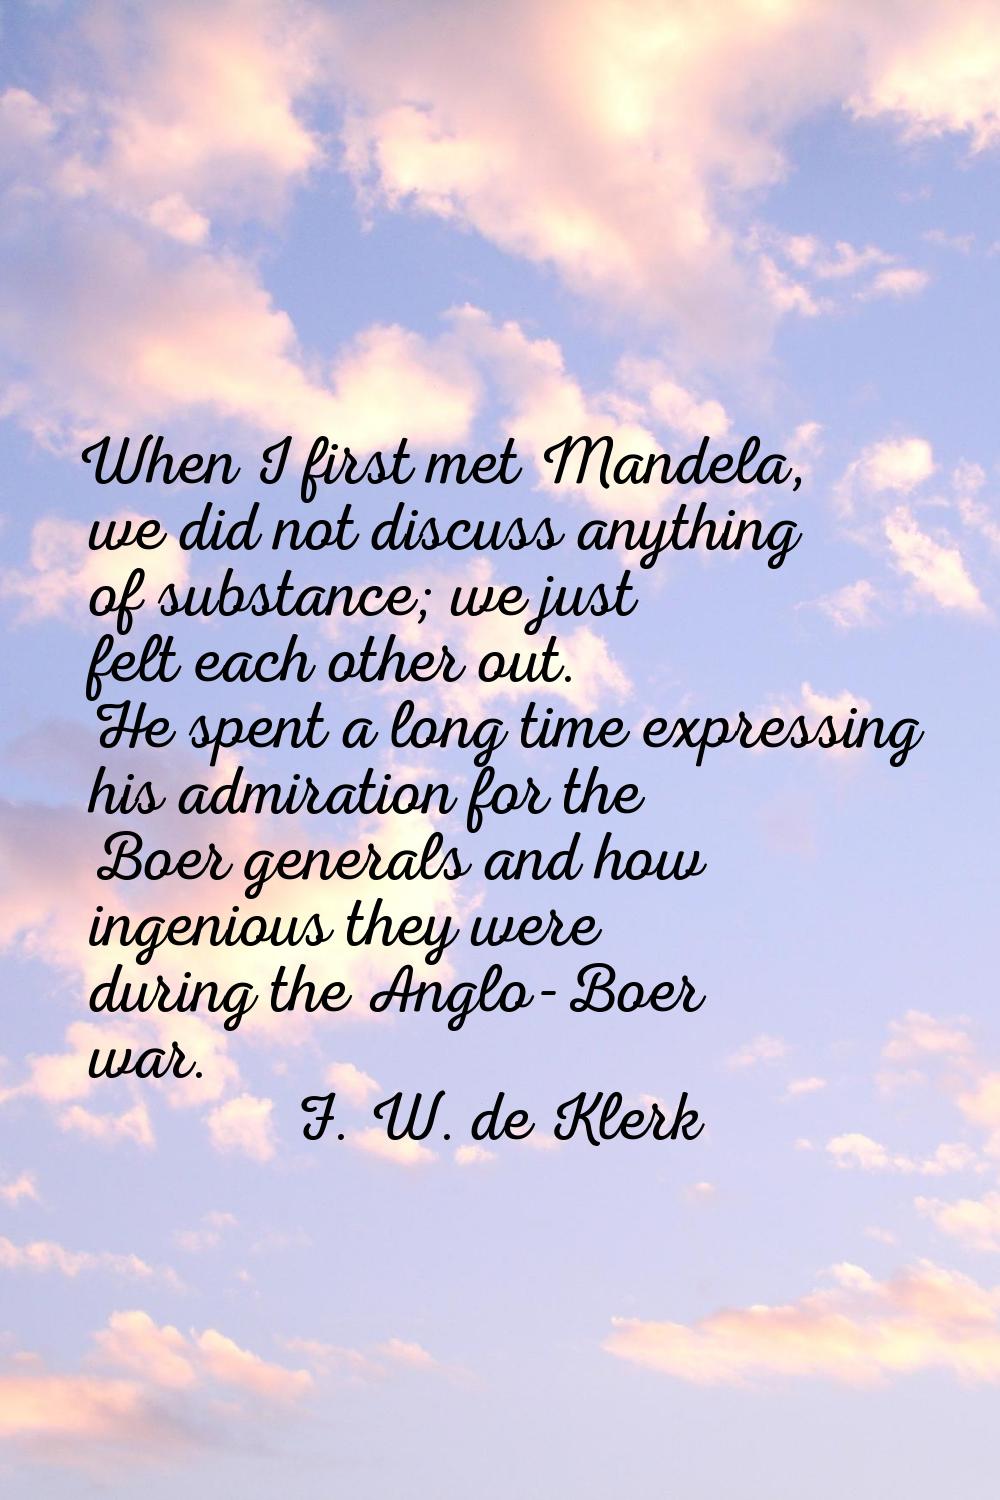 When I first met Mandela, we did not discuss anything of substance; we just felt each other out. He